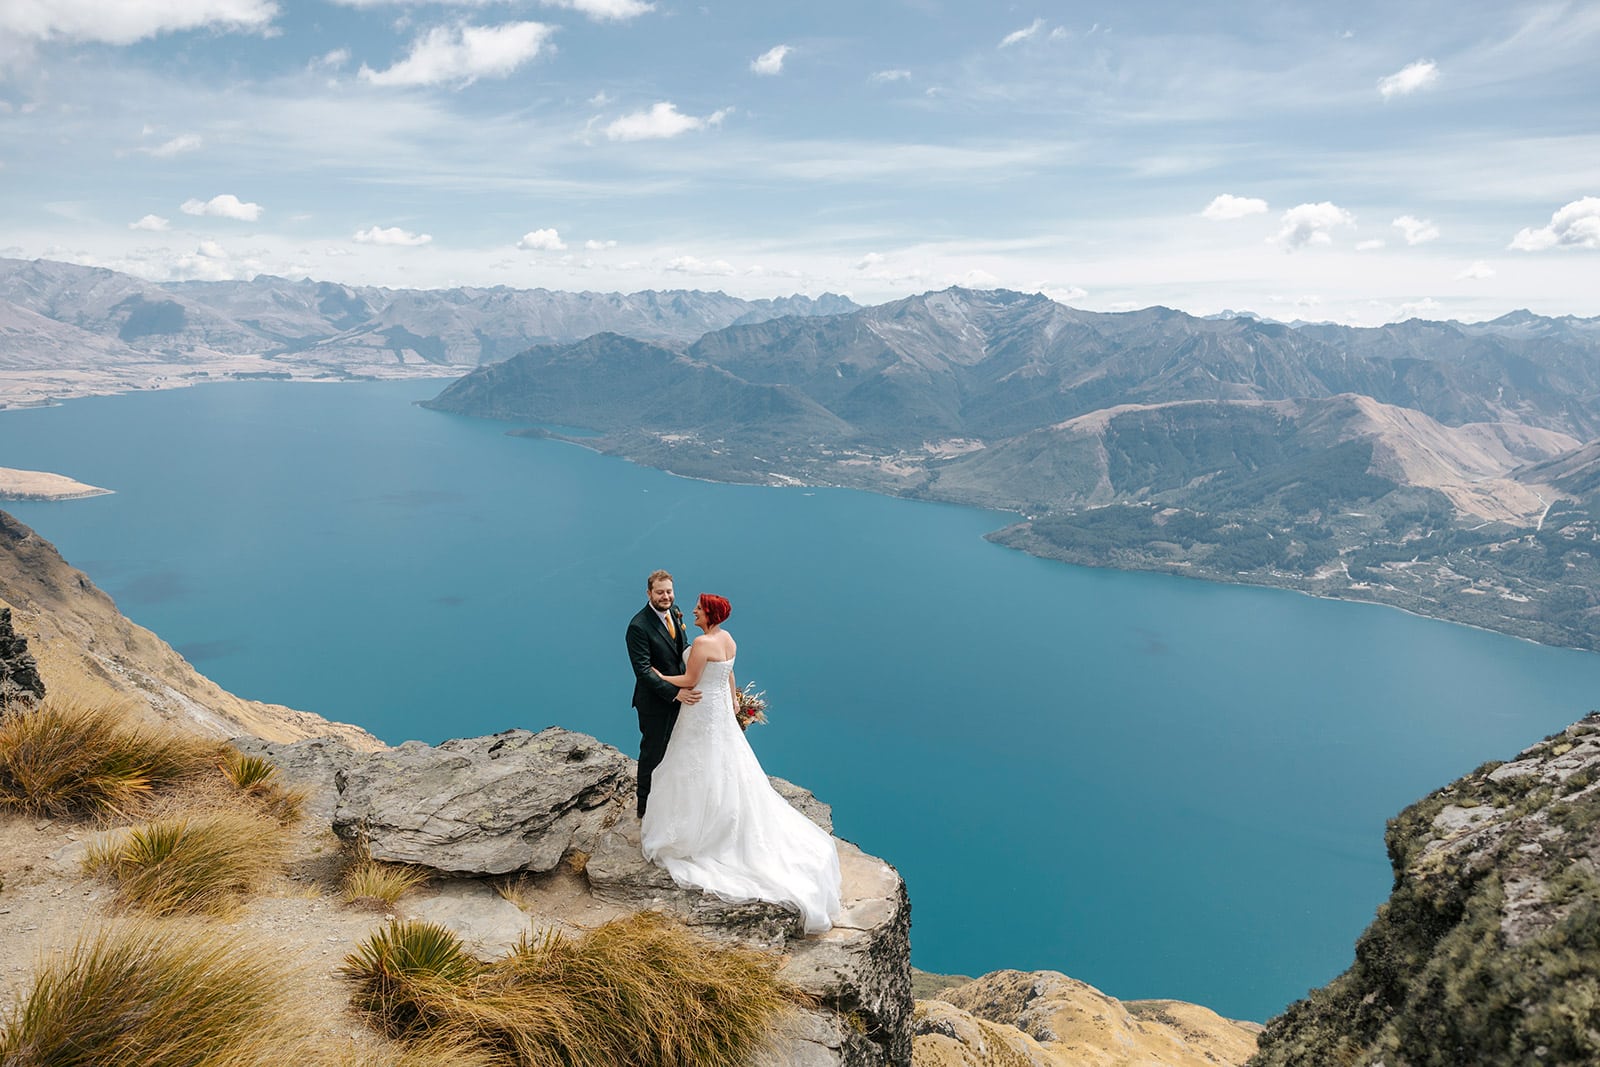 Heli Wedding Photos on The Ledge in Queenstown